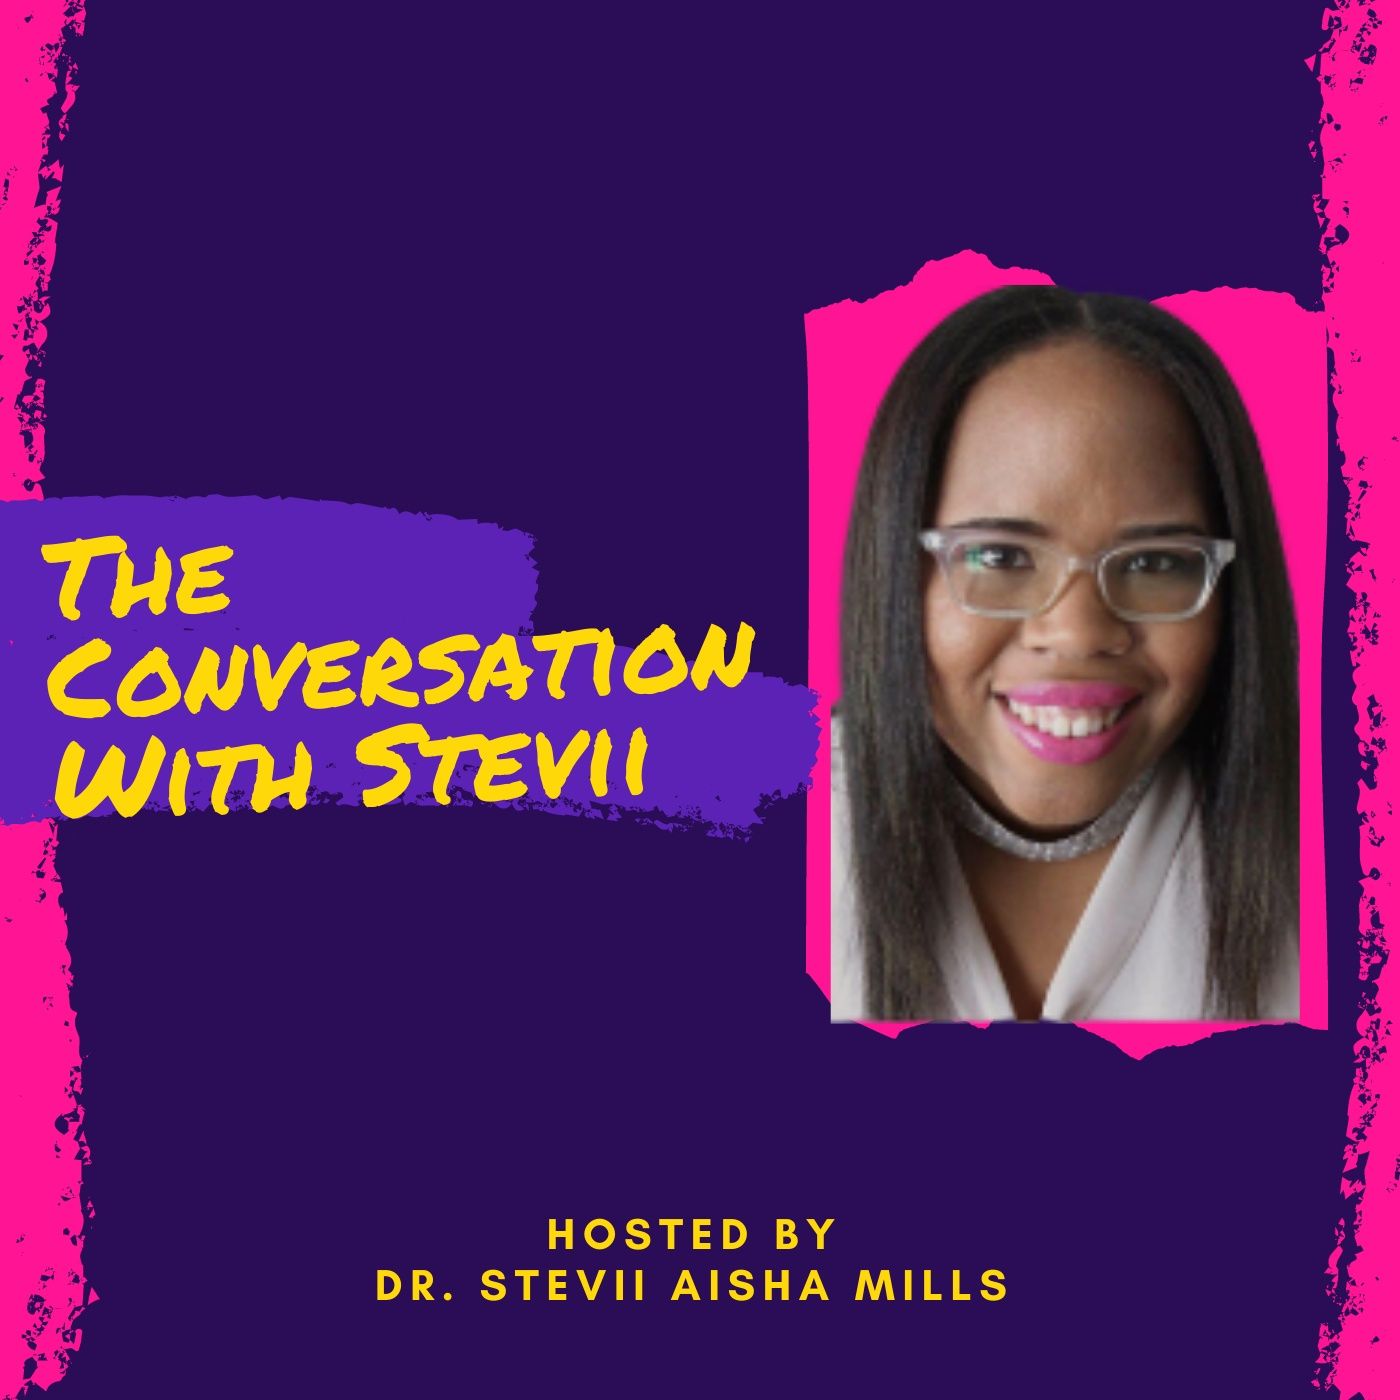 The Conversation With Stevii